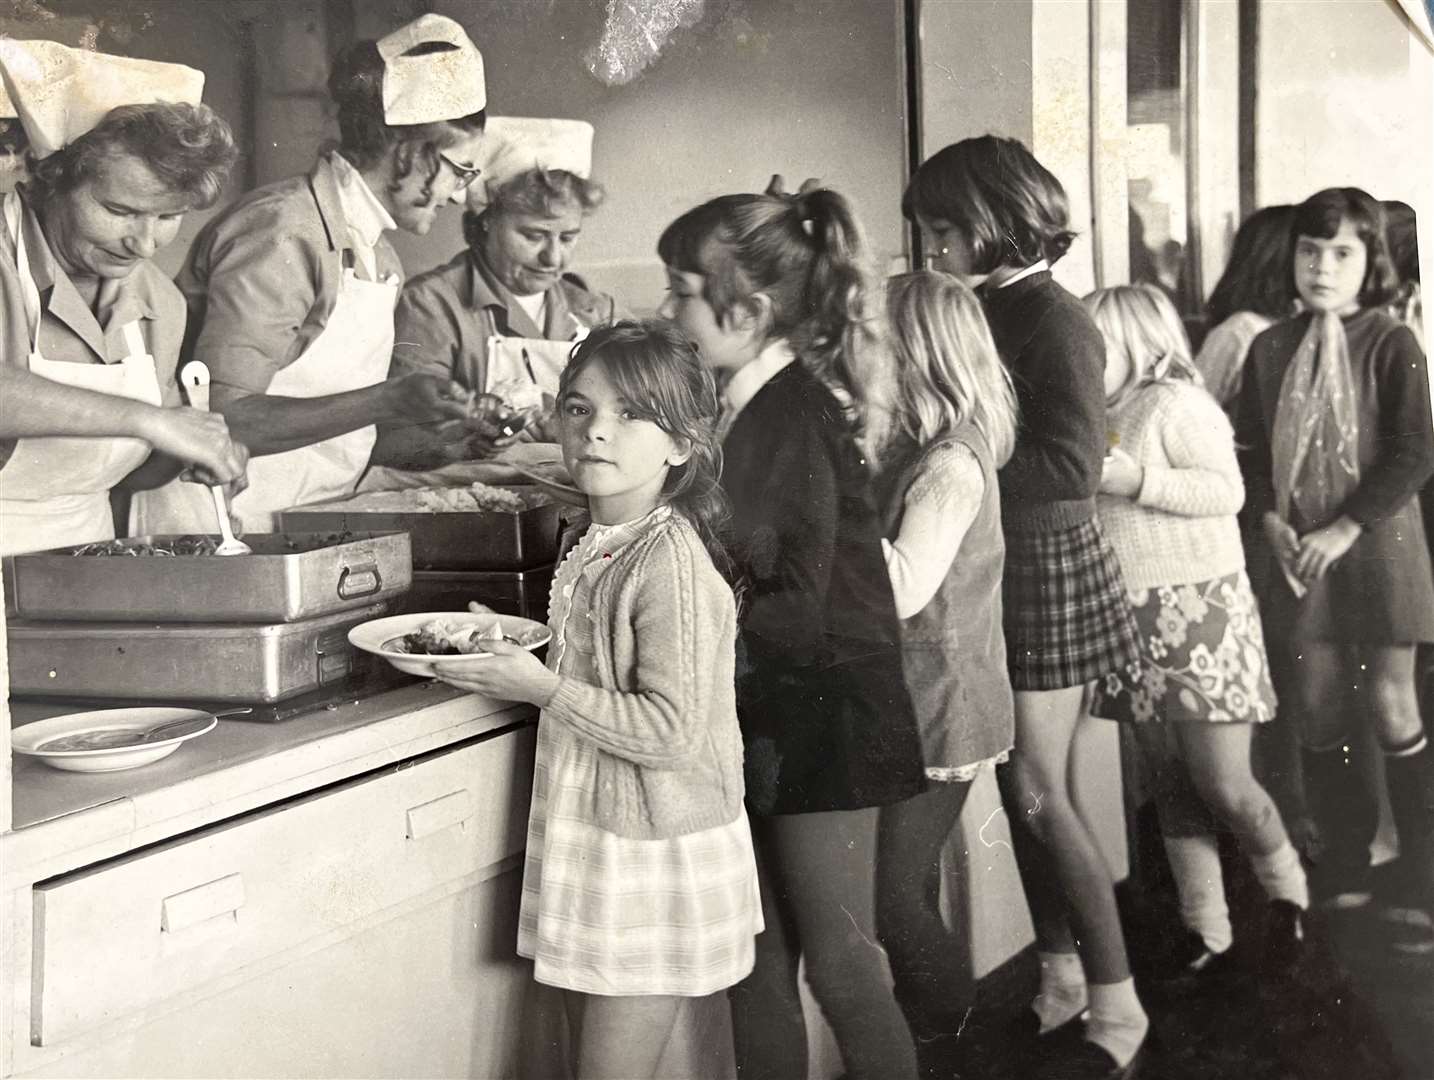 Pupils queue up for their lunch at Temple Hill school in the 1970s